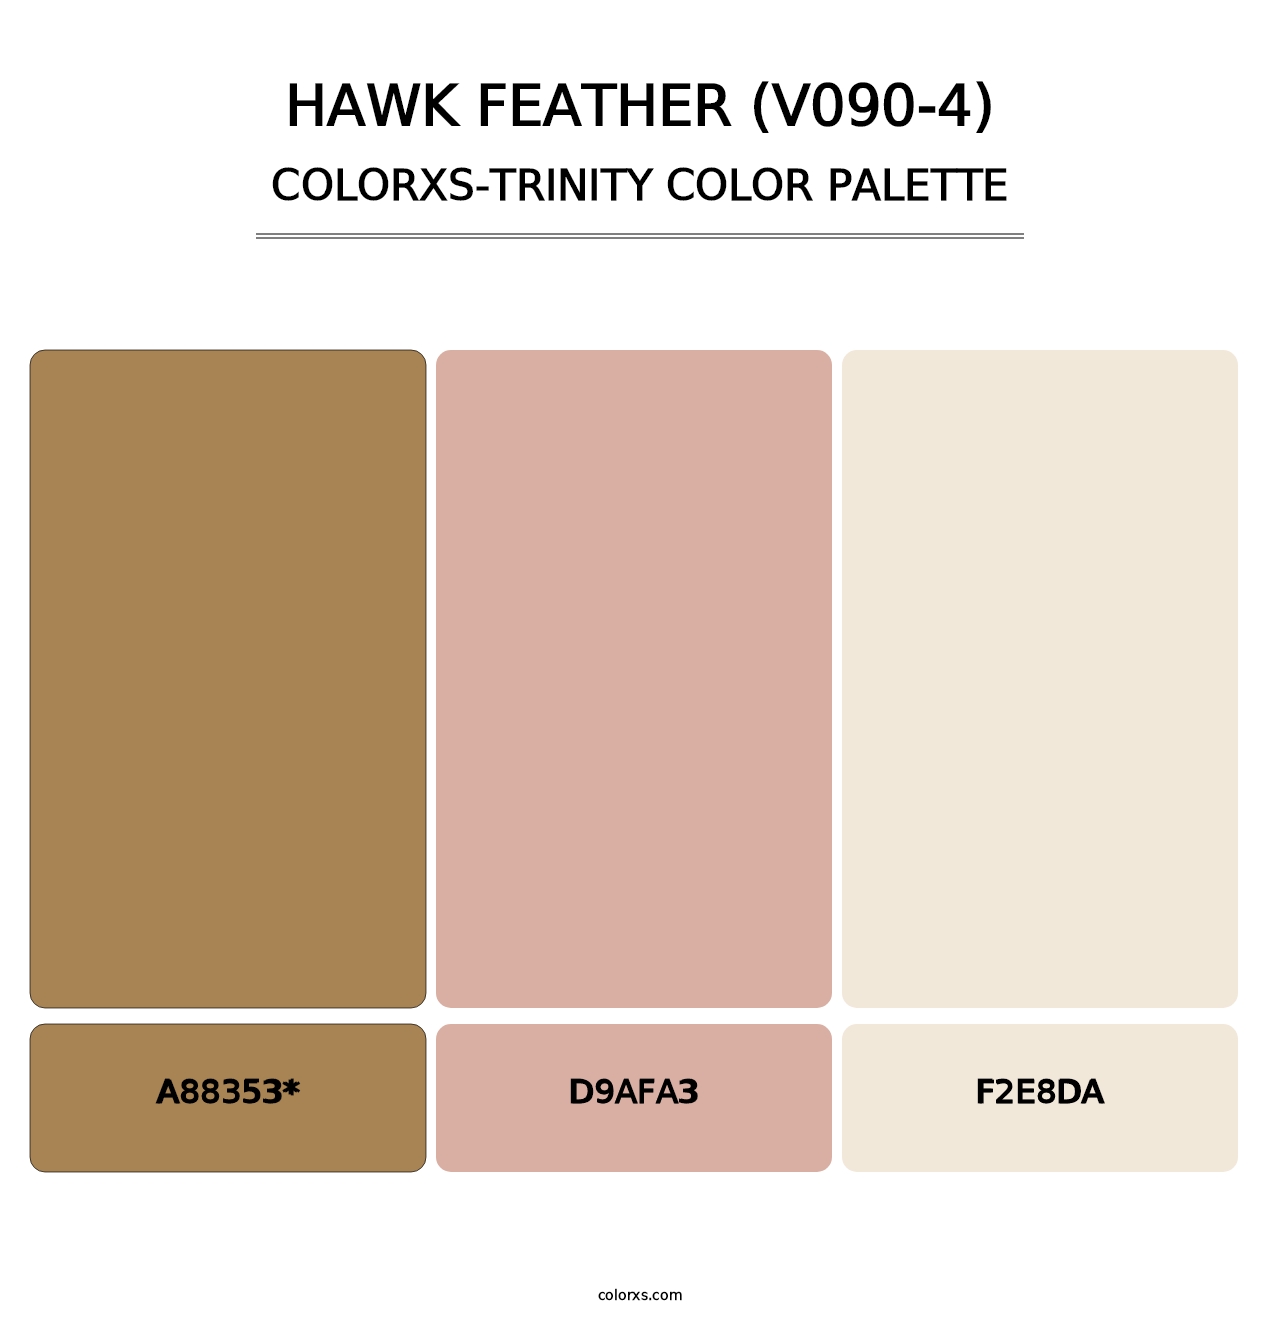 Hawk Feather (V090-4) - Colorxs Trinity Palette